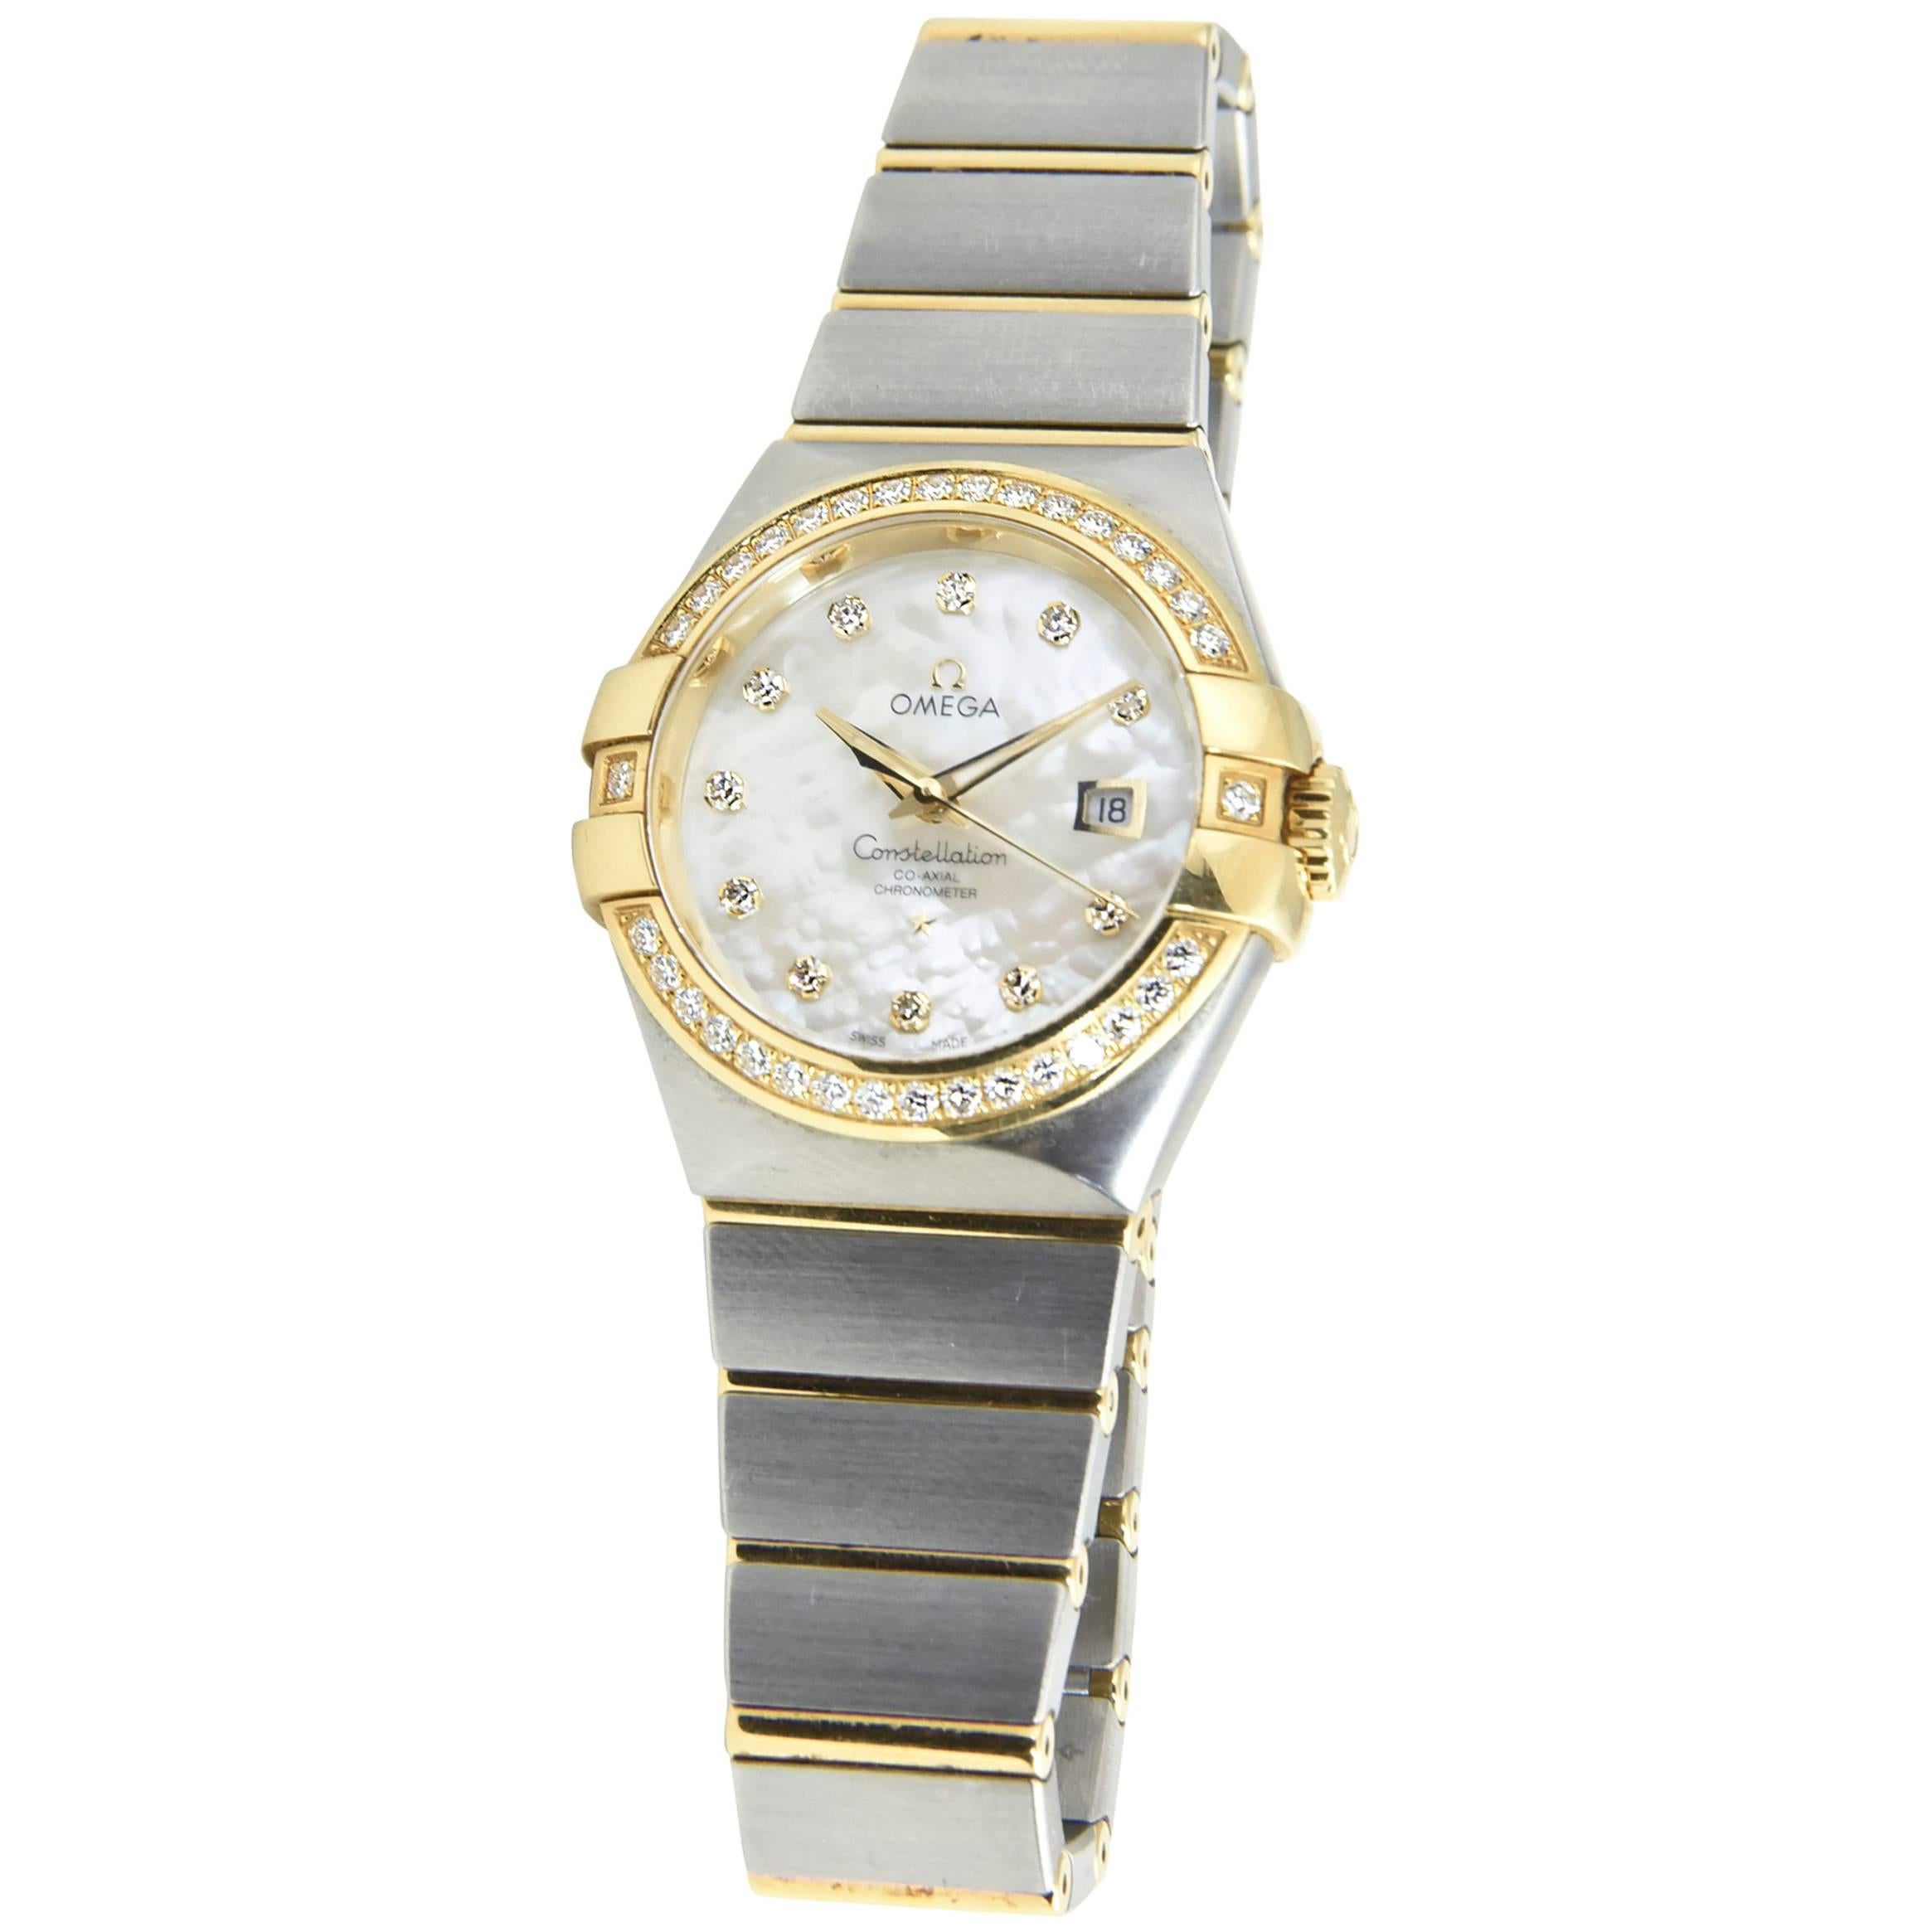 Omega Yellow Gold Stainless Steel Constellation Co-Axial Chronometer Wristwatch